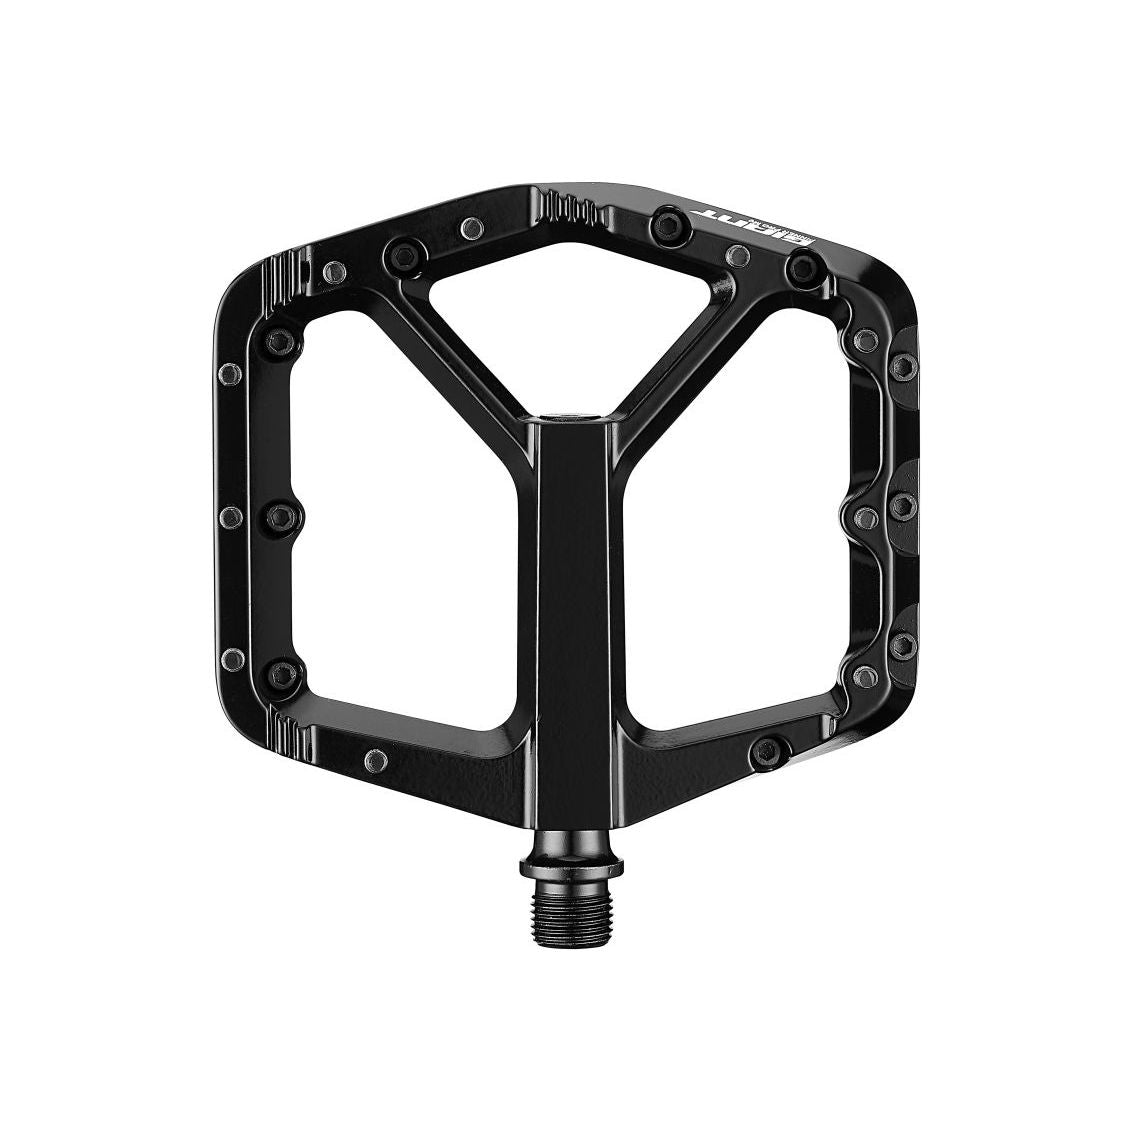 Flat Pinner Pro Mag Giant pedals